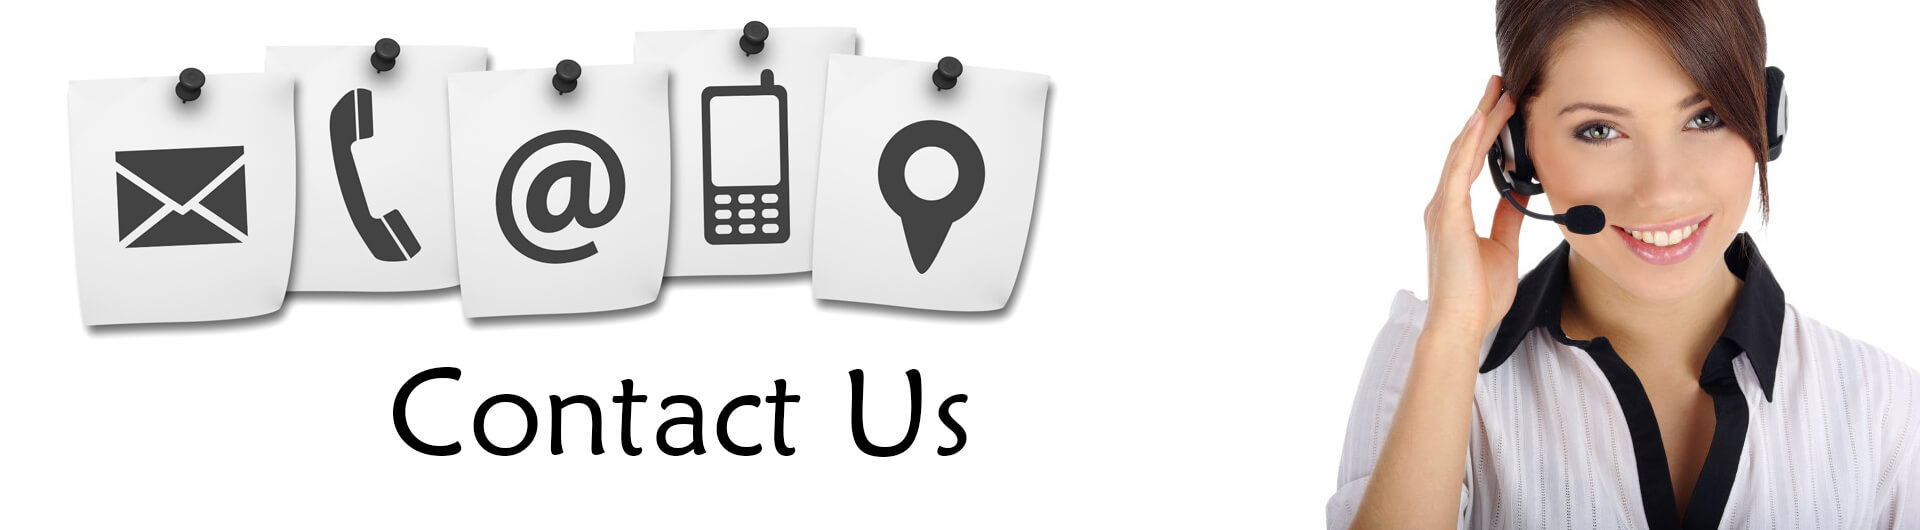 Contact Us Banner - Icons of Contact Methods, Phone Operator Standing By on Right Side